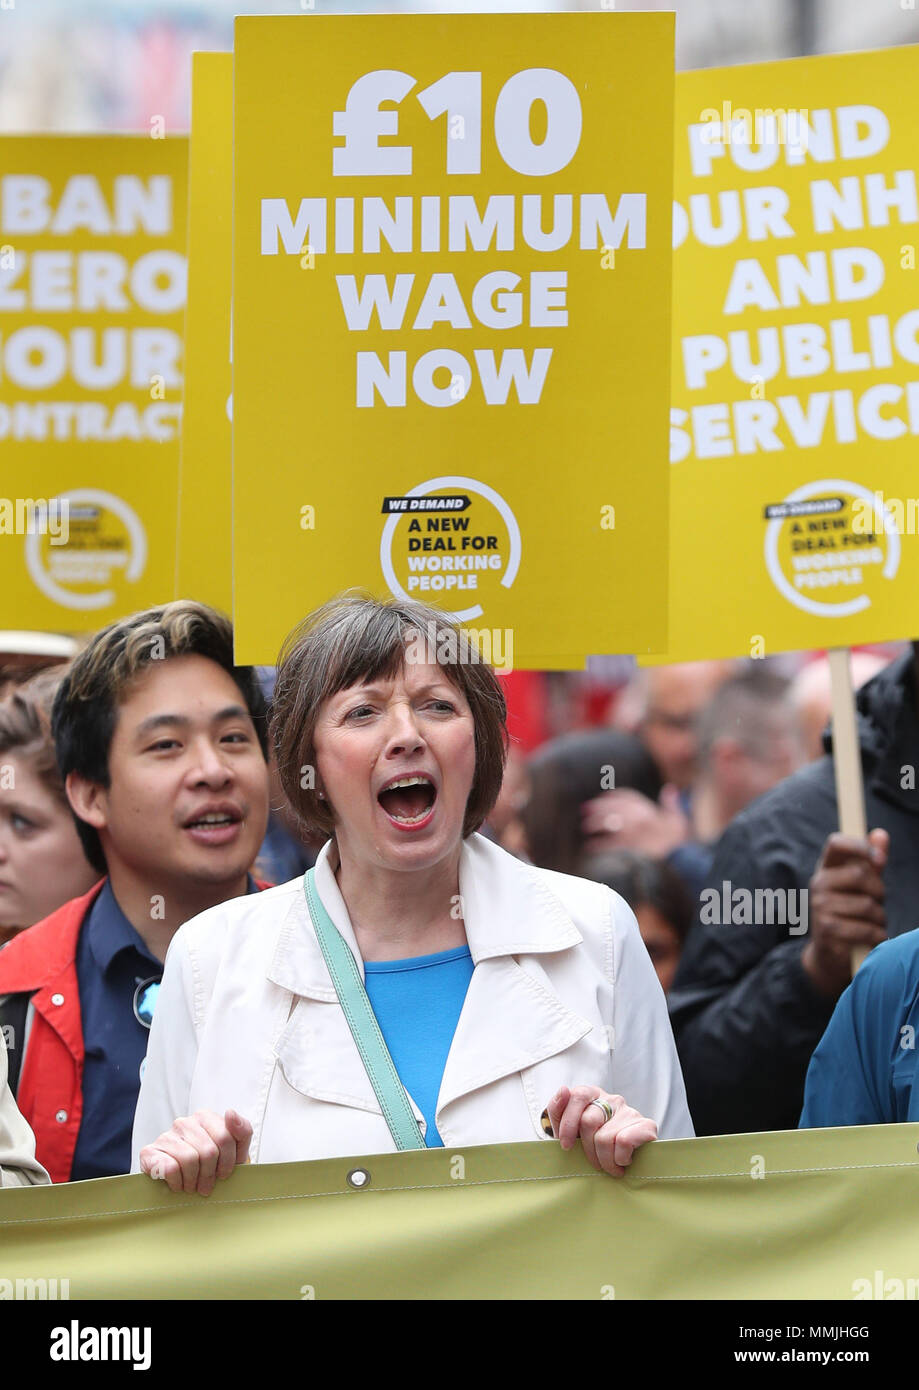 TUC General secretary Frances O'Grady (centre) during a TUC rally in central London, as part of its 'great jobs' campaign. Stock Photo